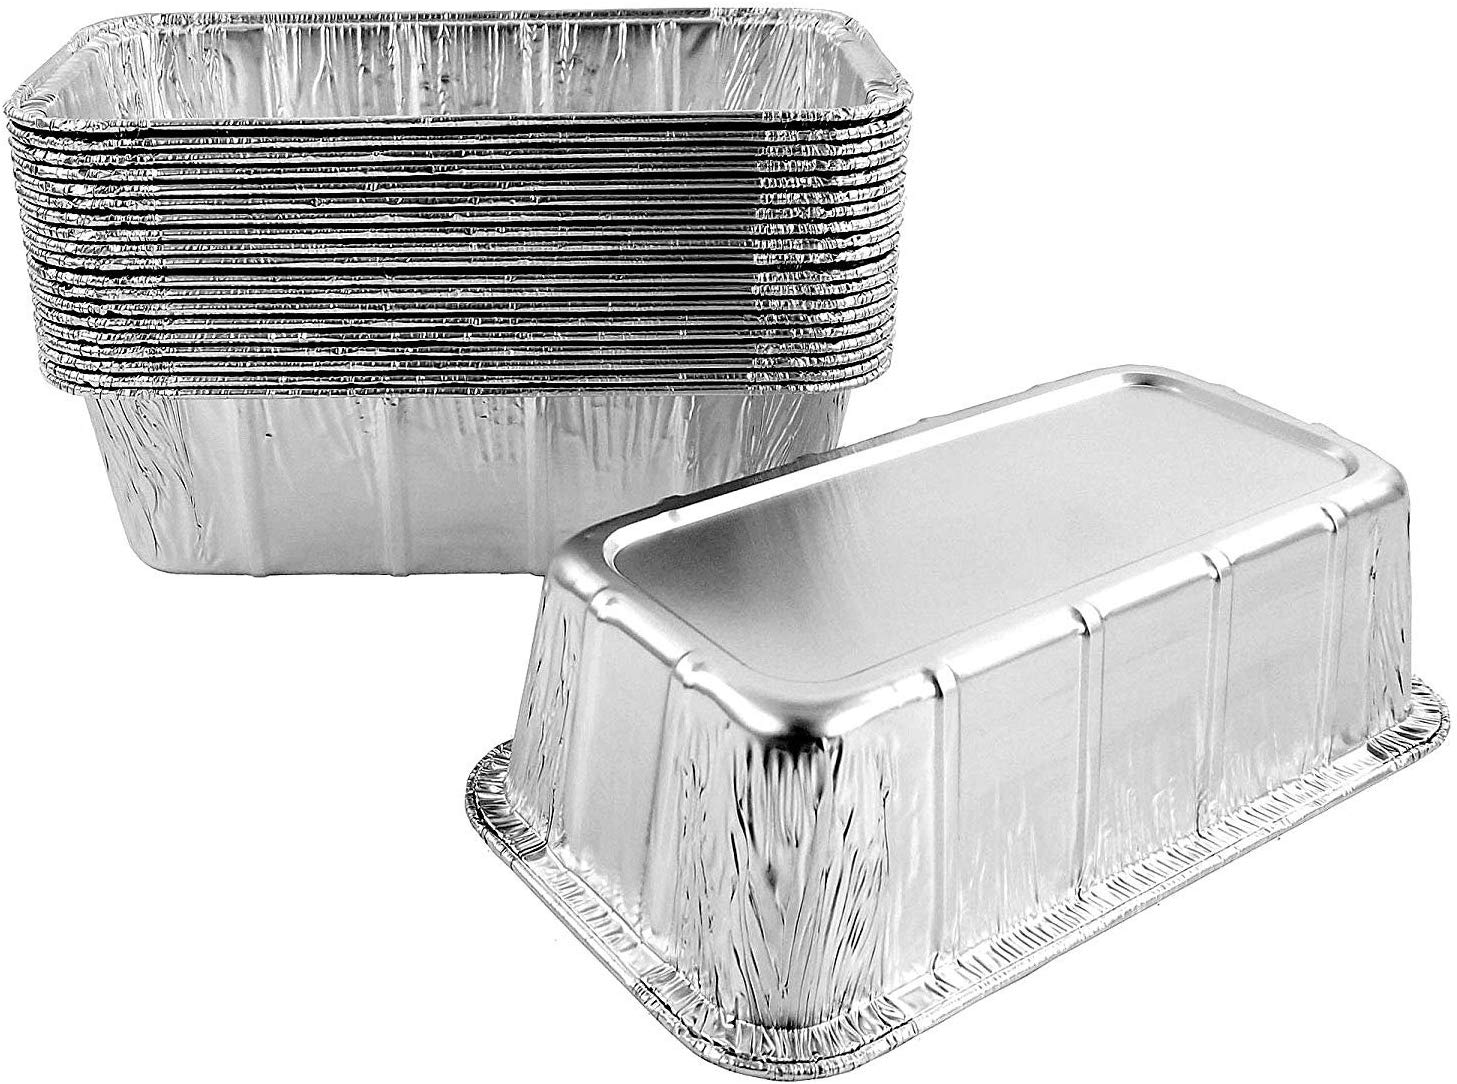 Pactogo 1 lb. Red Aluminum Foil Holiday Mini-Loaf Snowflake Pan w